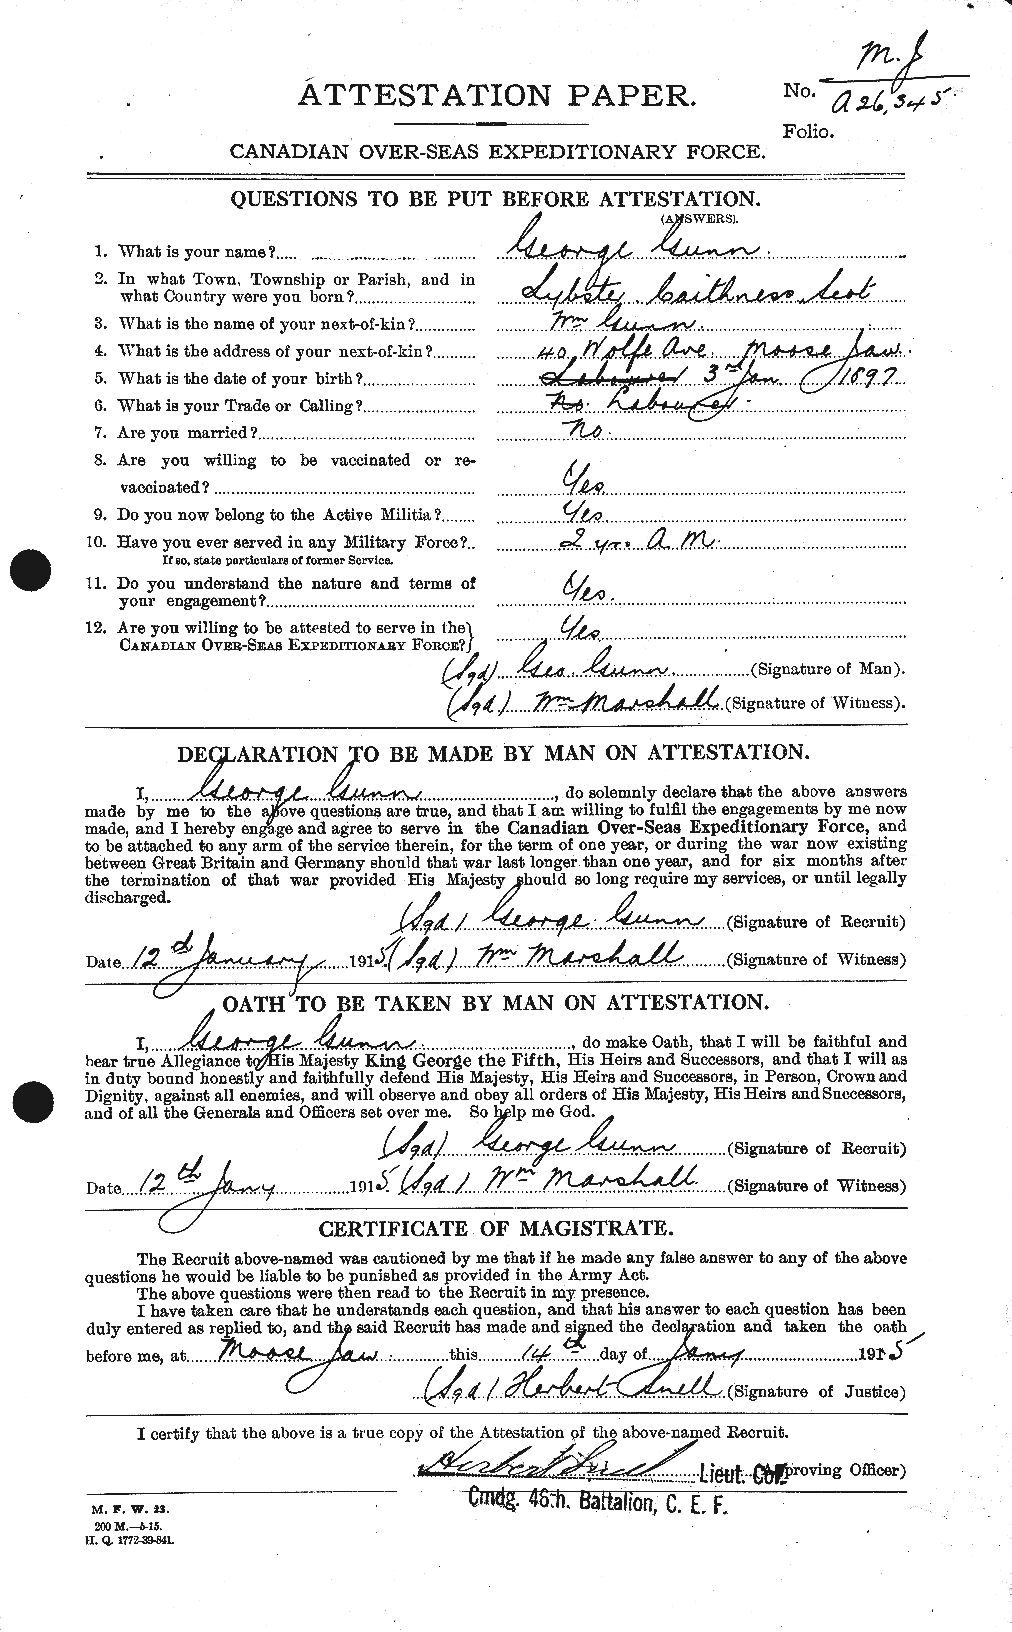 Personnel Records of the First World War - CEF 369237a